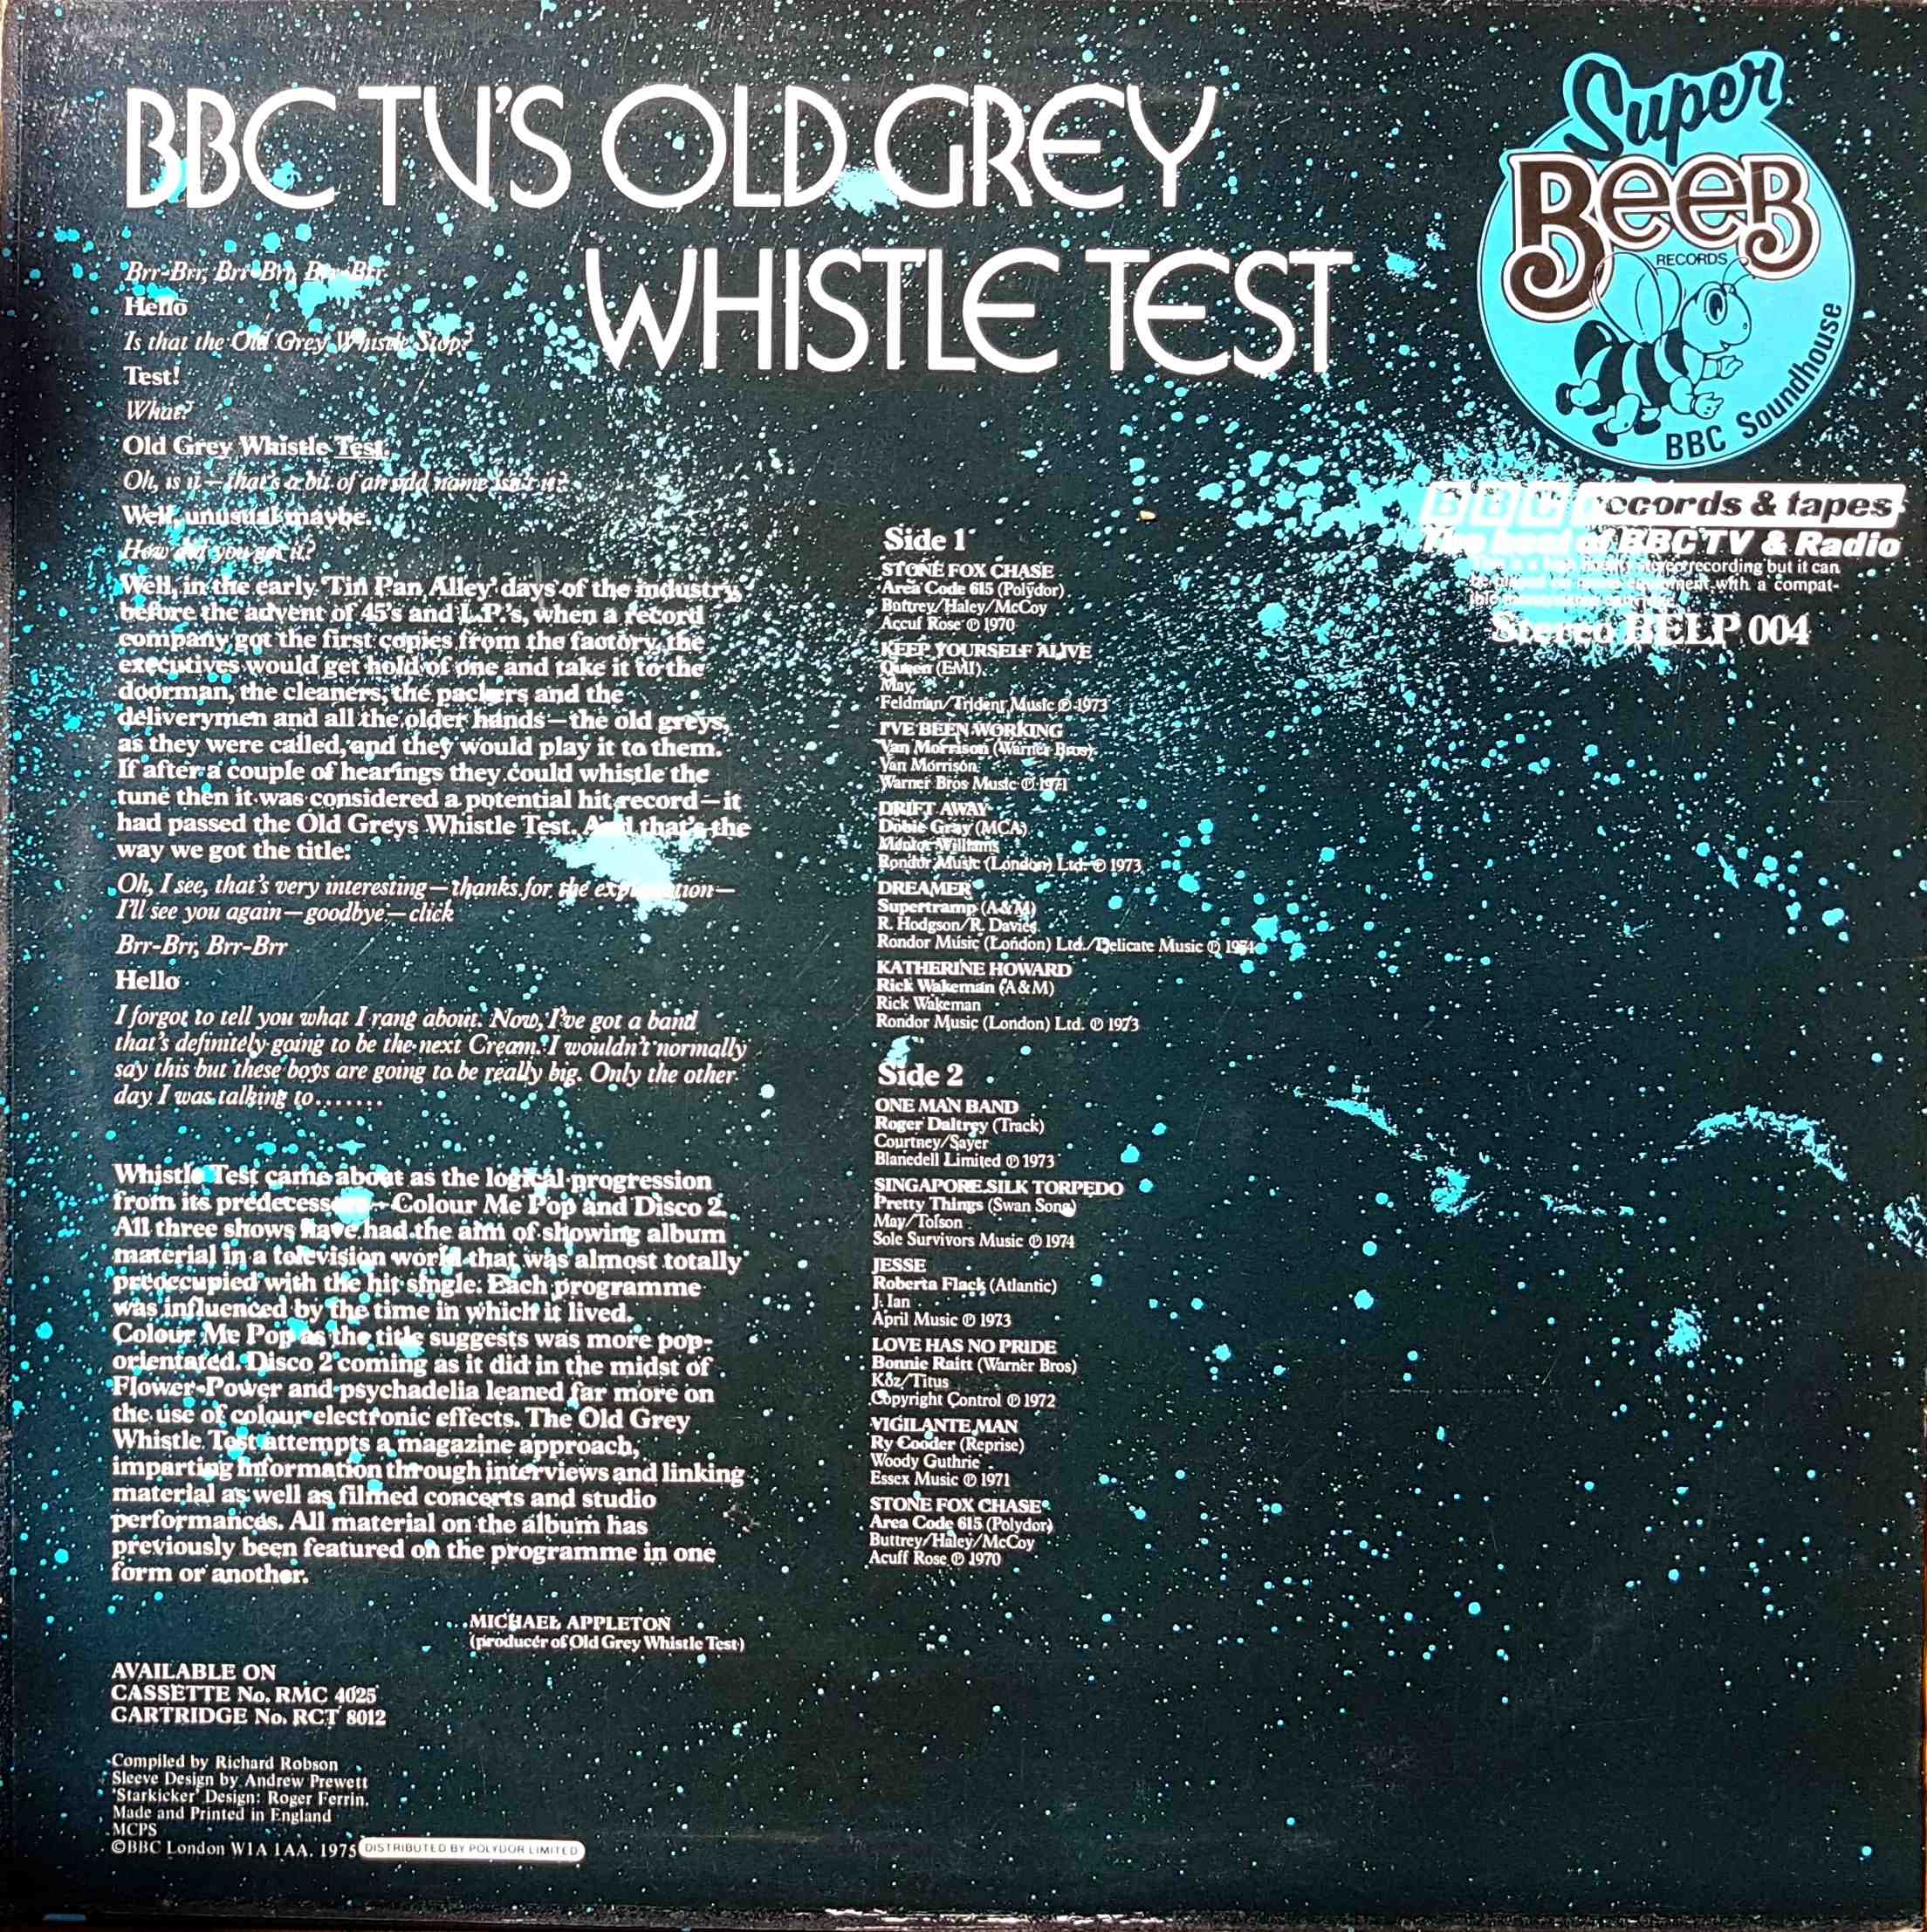 Picture of BELP 004 Old grey whistle test by artist Various from the BBC records and Tapes library